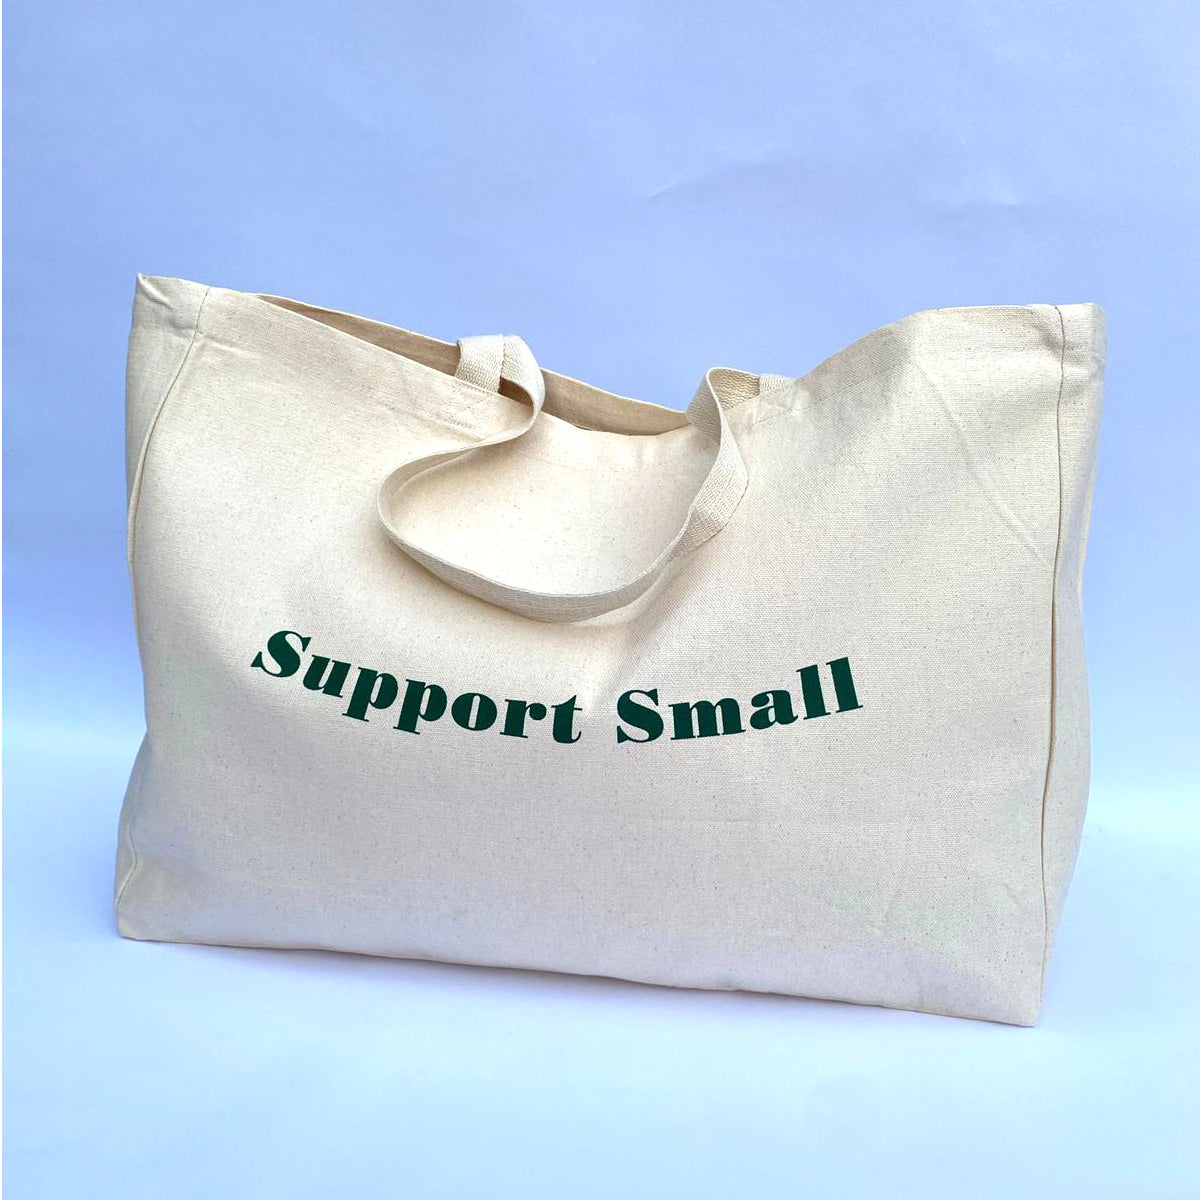 Cream and Dark Green 'Support Small' Large Canvas Bag